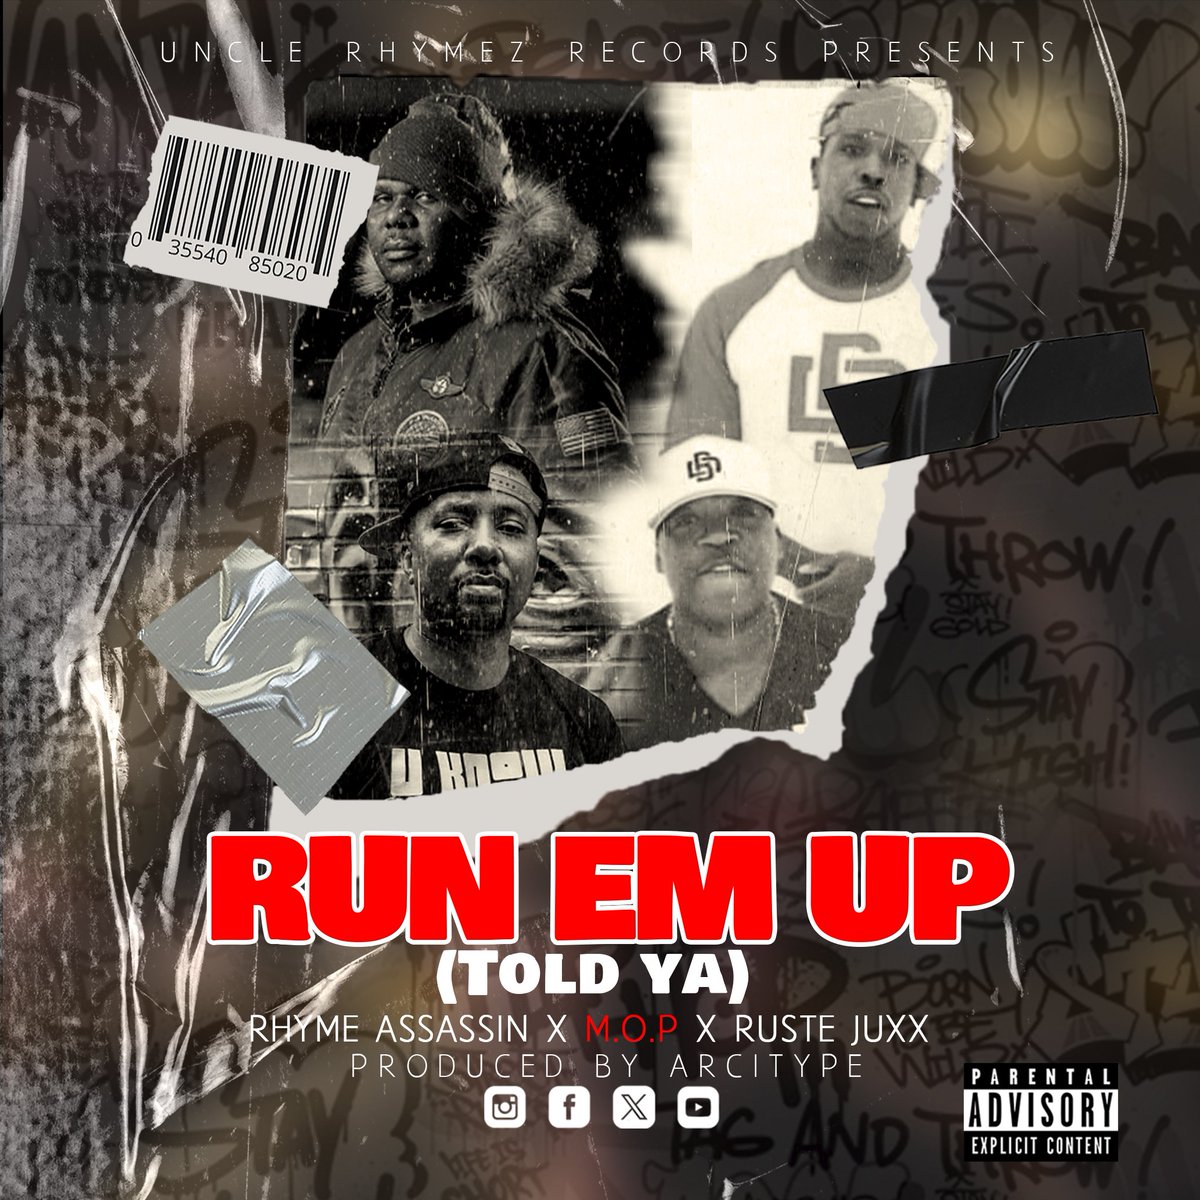 RUN EM UP (Told ya)  !!! Feat M.O.P and Ruste Juxx drops 19th of April and can be streamed on all major platforms. Its an honour for me Produced by The Arcitype . 

#RunEmUp #toldya #MOP #billydanze #LilFame #Arcitype #unclerhymez #RhymeAssassin  #dedicatedtoselfalbum